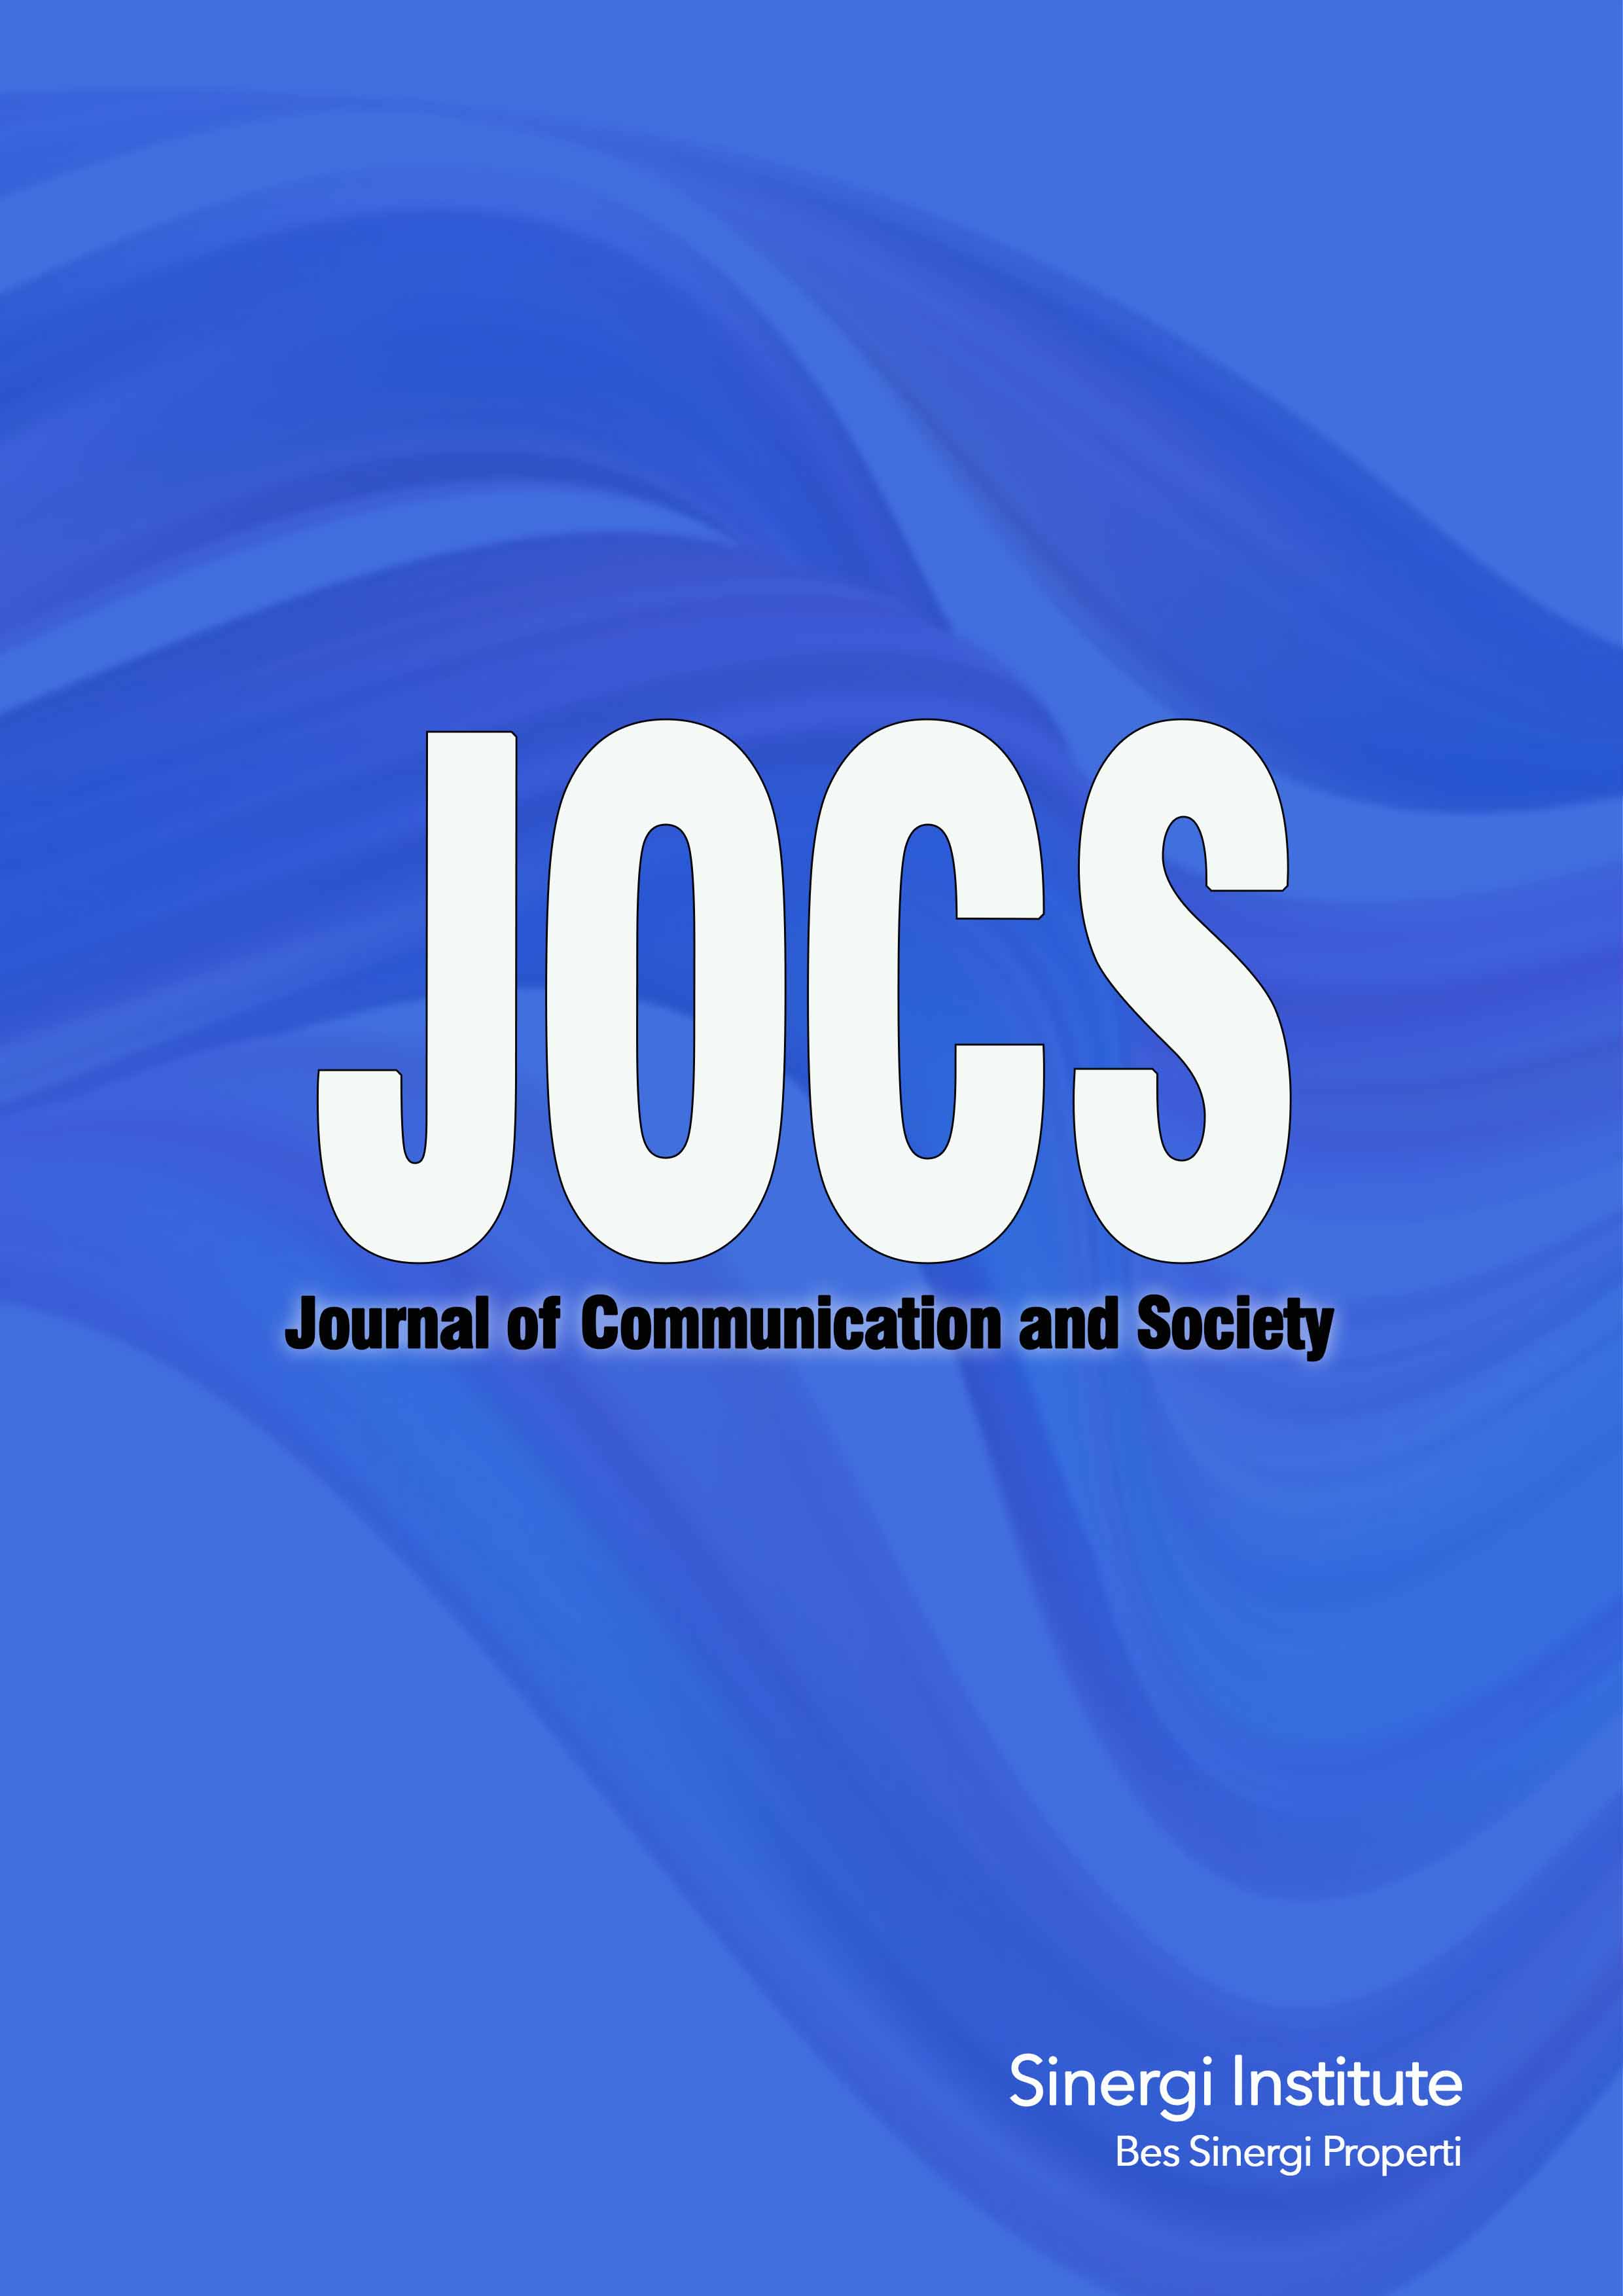 Journal of Communication and Society